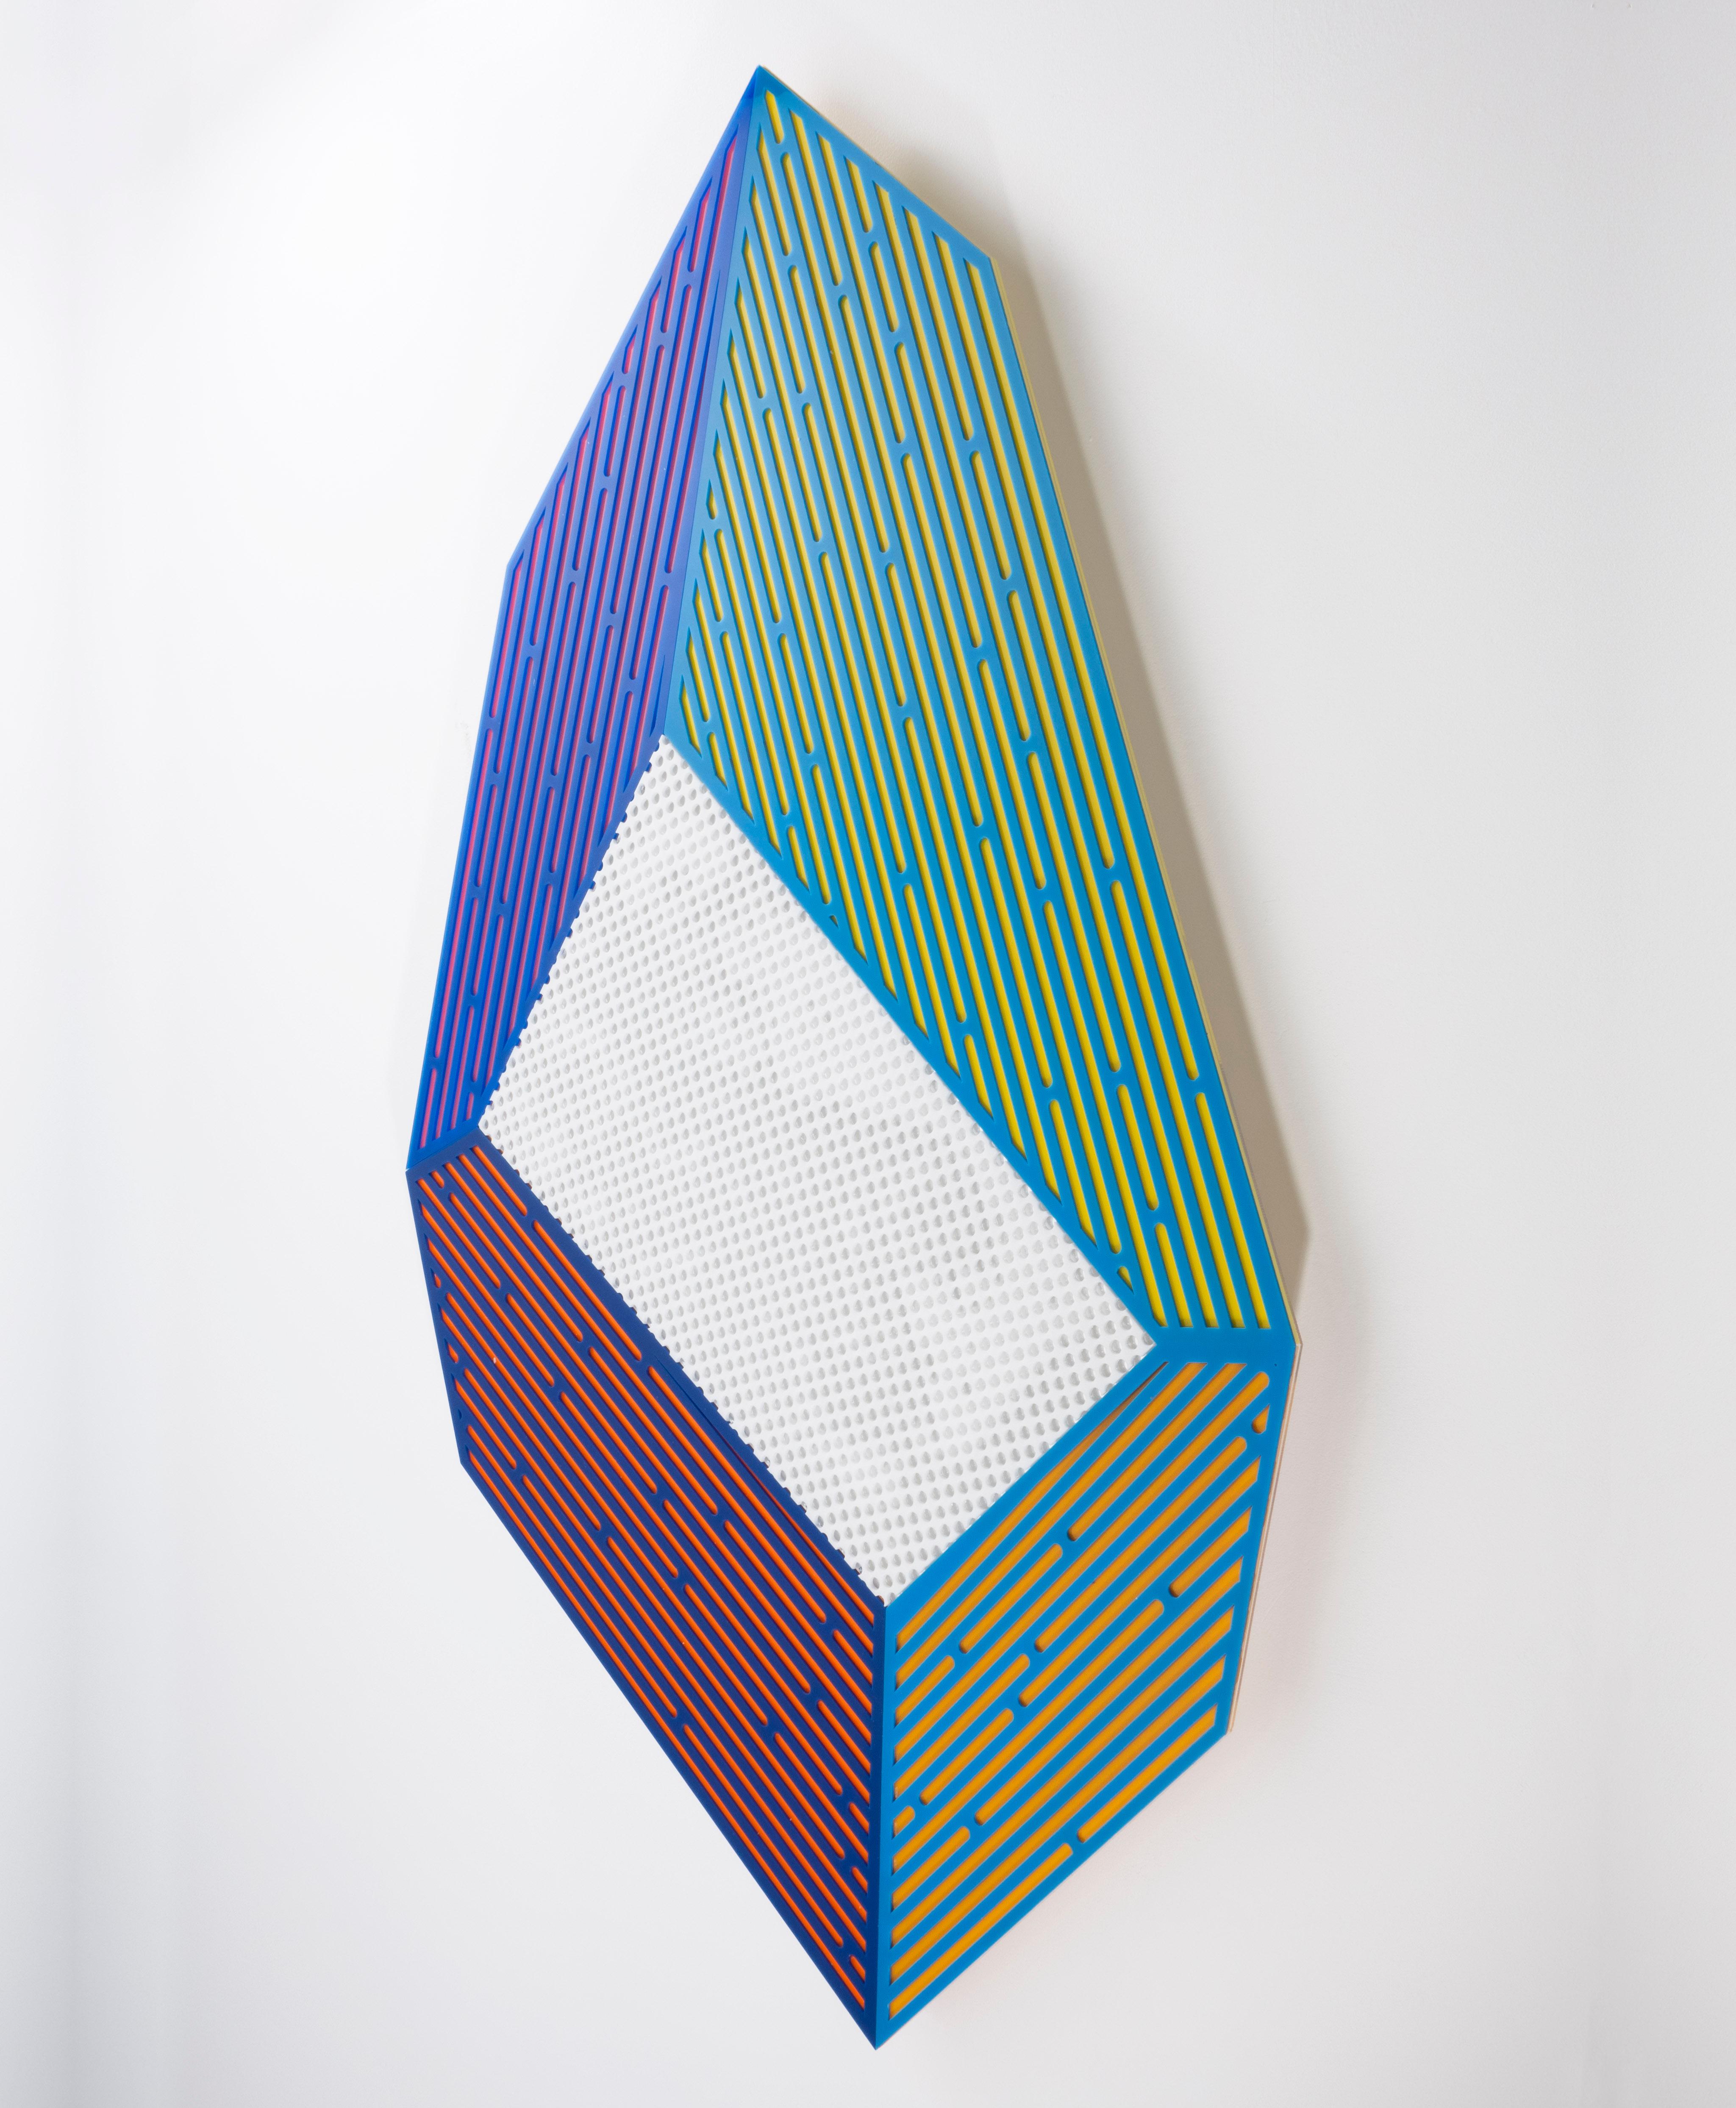 Prismatic Polygon V: geometric abstract wall-mounted sculpture in red green blue - Sculpture by Jay Walker